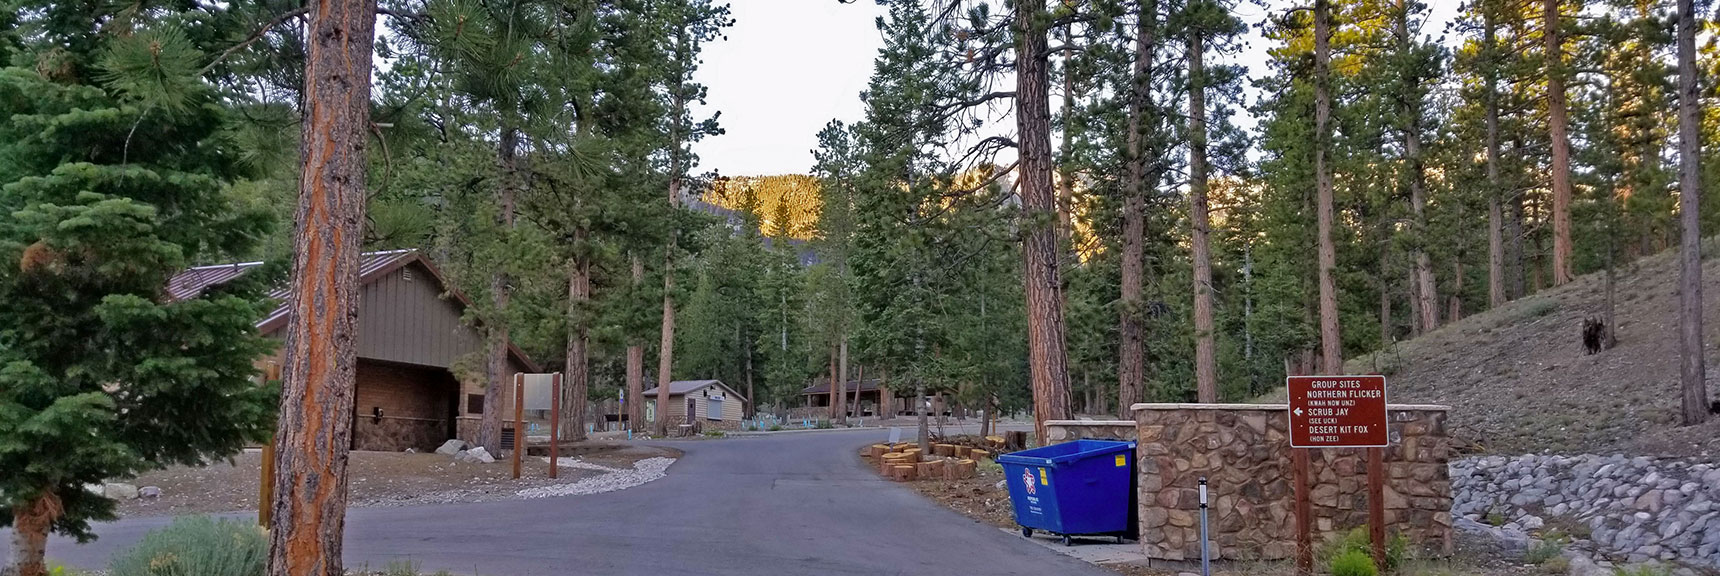 Passing Through Foxtail Picnic Area. Ghost Town at 7am, Even on Saturday. | Lee to Kyle Canyon | Foxtail Approach | Mt Charleston Wilderness | Spring Mountains, Nevada